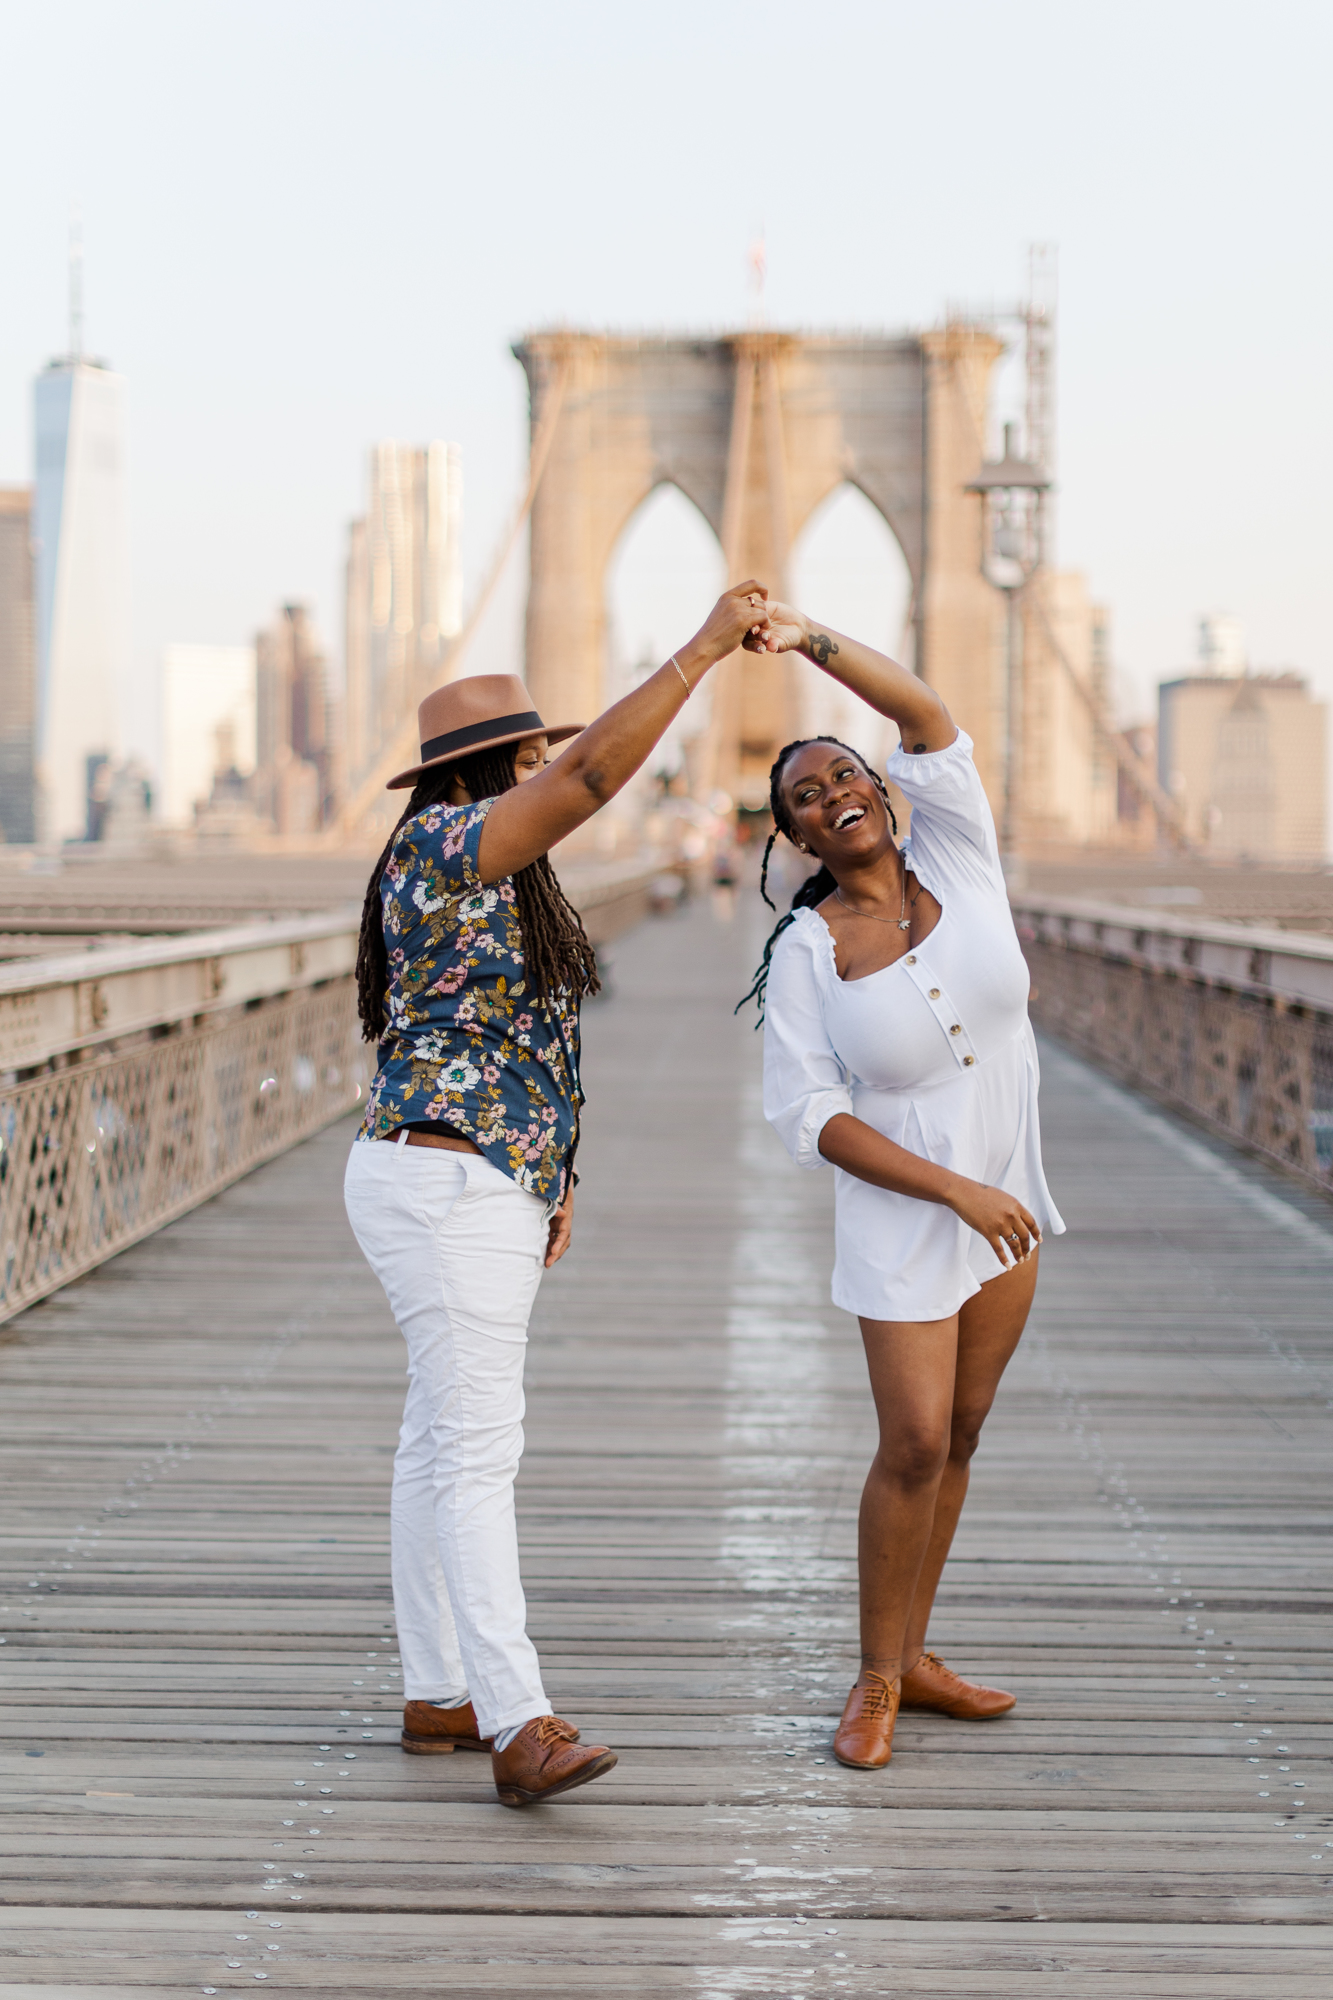 Lively Summer Engagement Photography in DUMBO